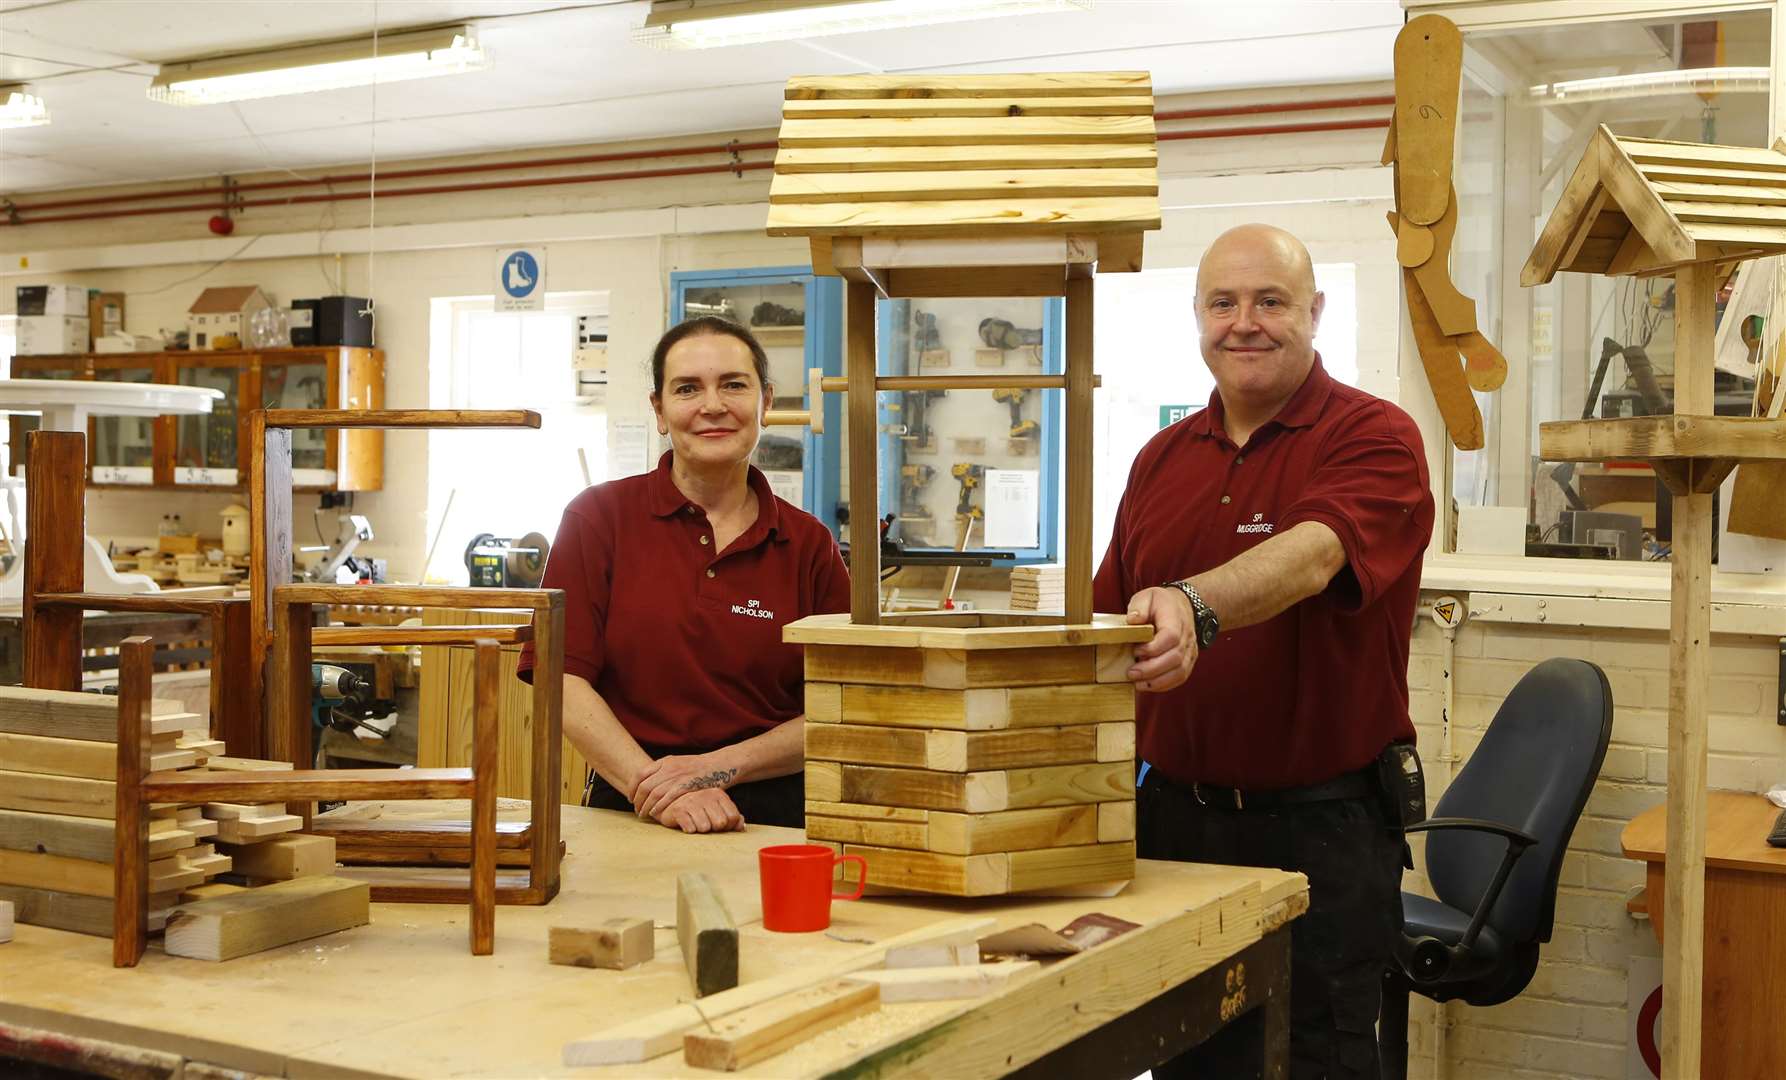 A wood workshop for the prisoners is run by Angie Nicholson and Andy Muggridge